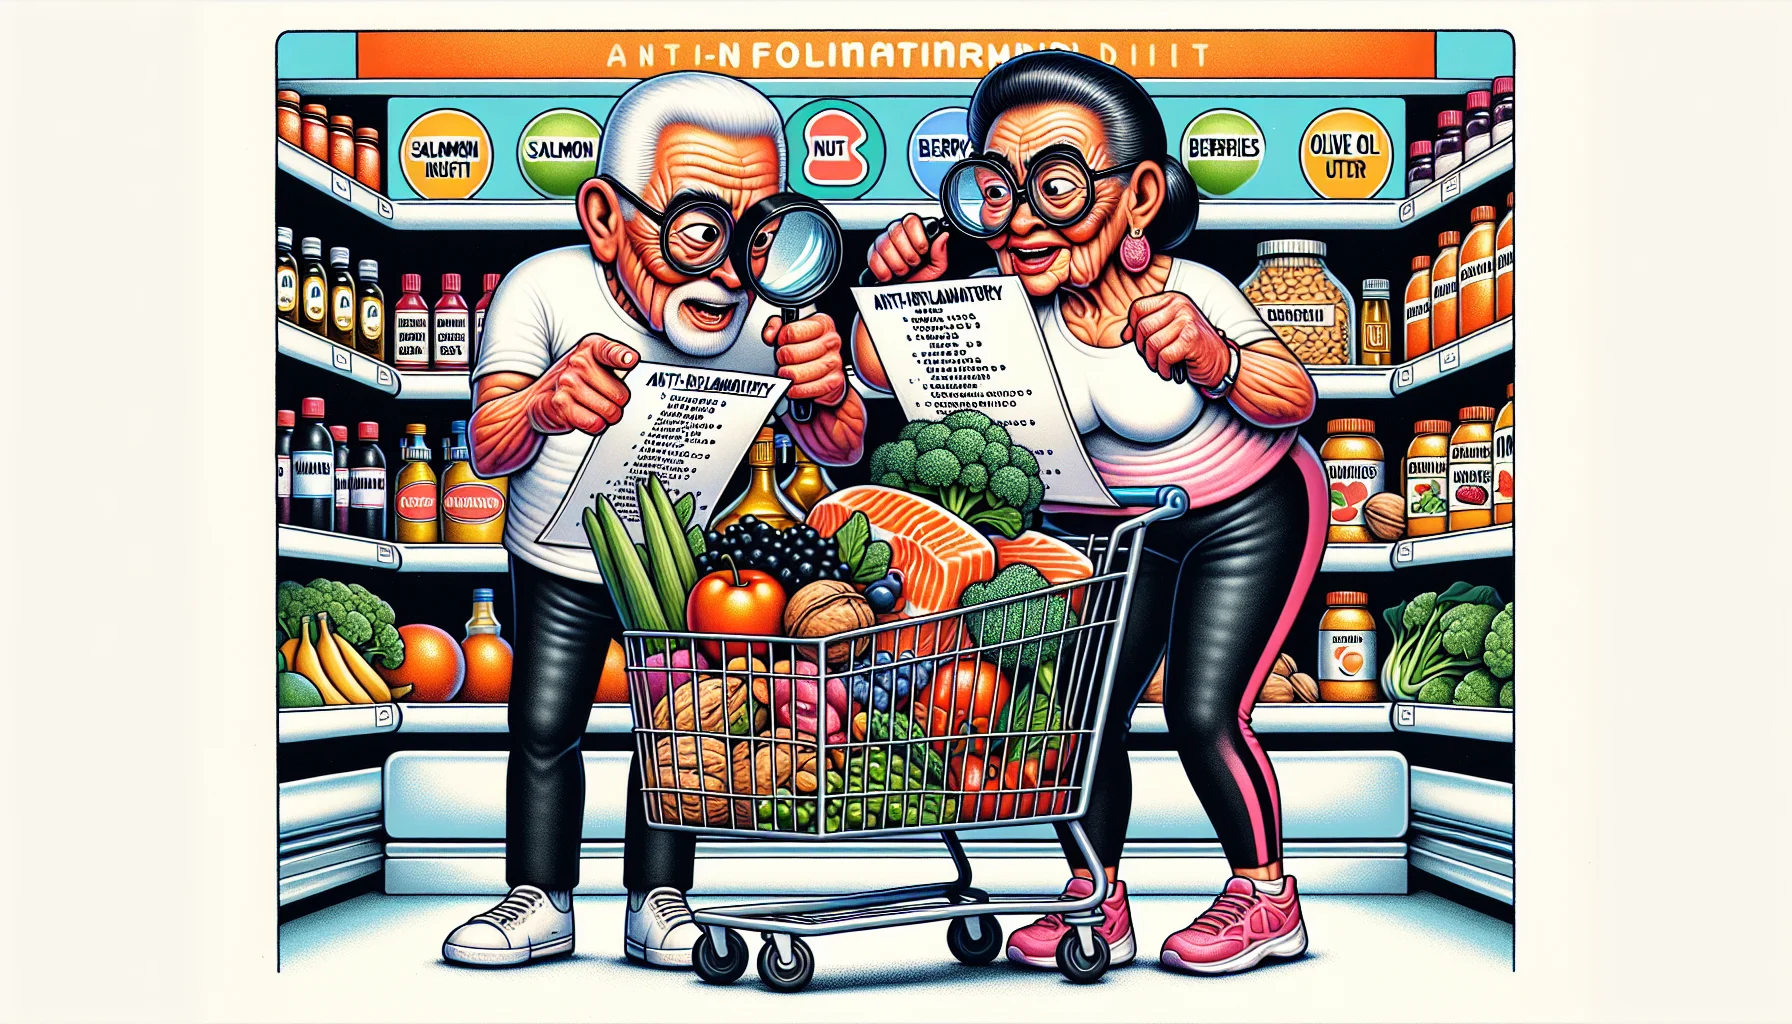 Generate an amusing, real-world illustration that highlights an anti-inflammatory diet shopping list. Imagine a scene at a bustling grocery store where two elderly individuals, one Hispanic man and one South Asian woman, are meticulously examining their diet shopping lists. They're both filled with enthusiasm and playfully using oversized magnifying glasses to read their list. Each item on their shopping list - salmon, nuts, berries, broccoli, and olive oil - are adorned with funny faces and caricatured as if in a comic strip. Their shopping cart is overflowing with fruits and vegetables, wearing gym gear and lifting mini weights, signifying their healthy properties.